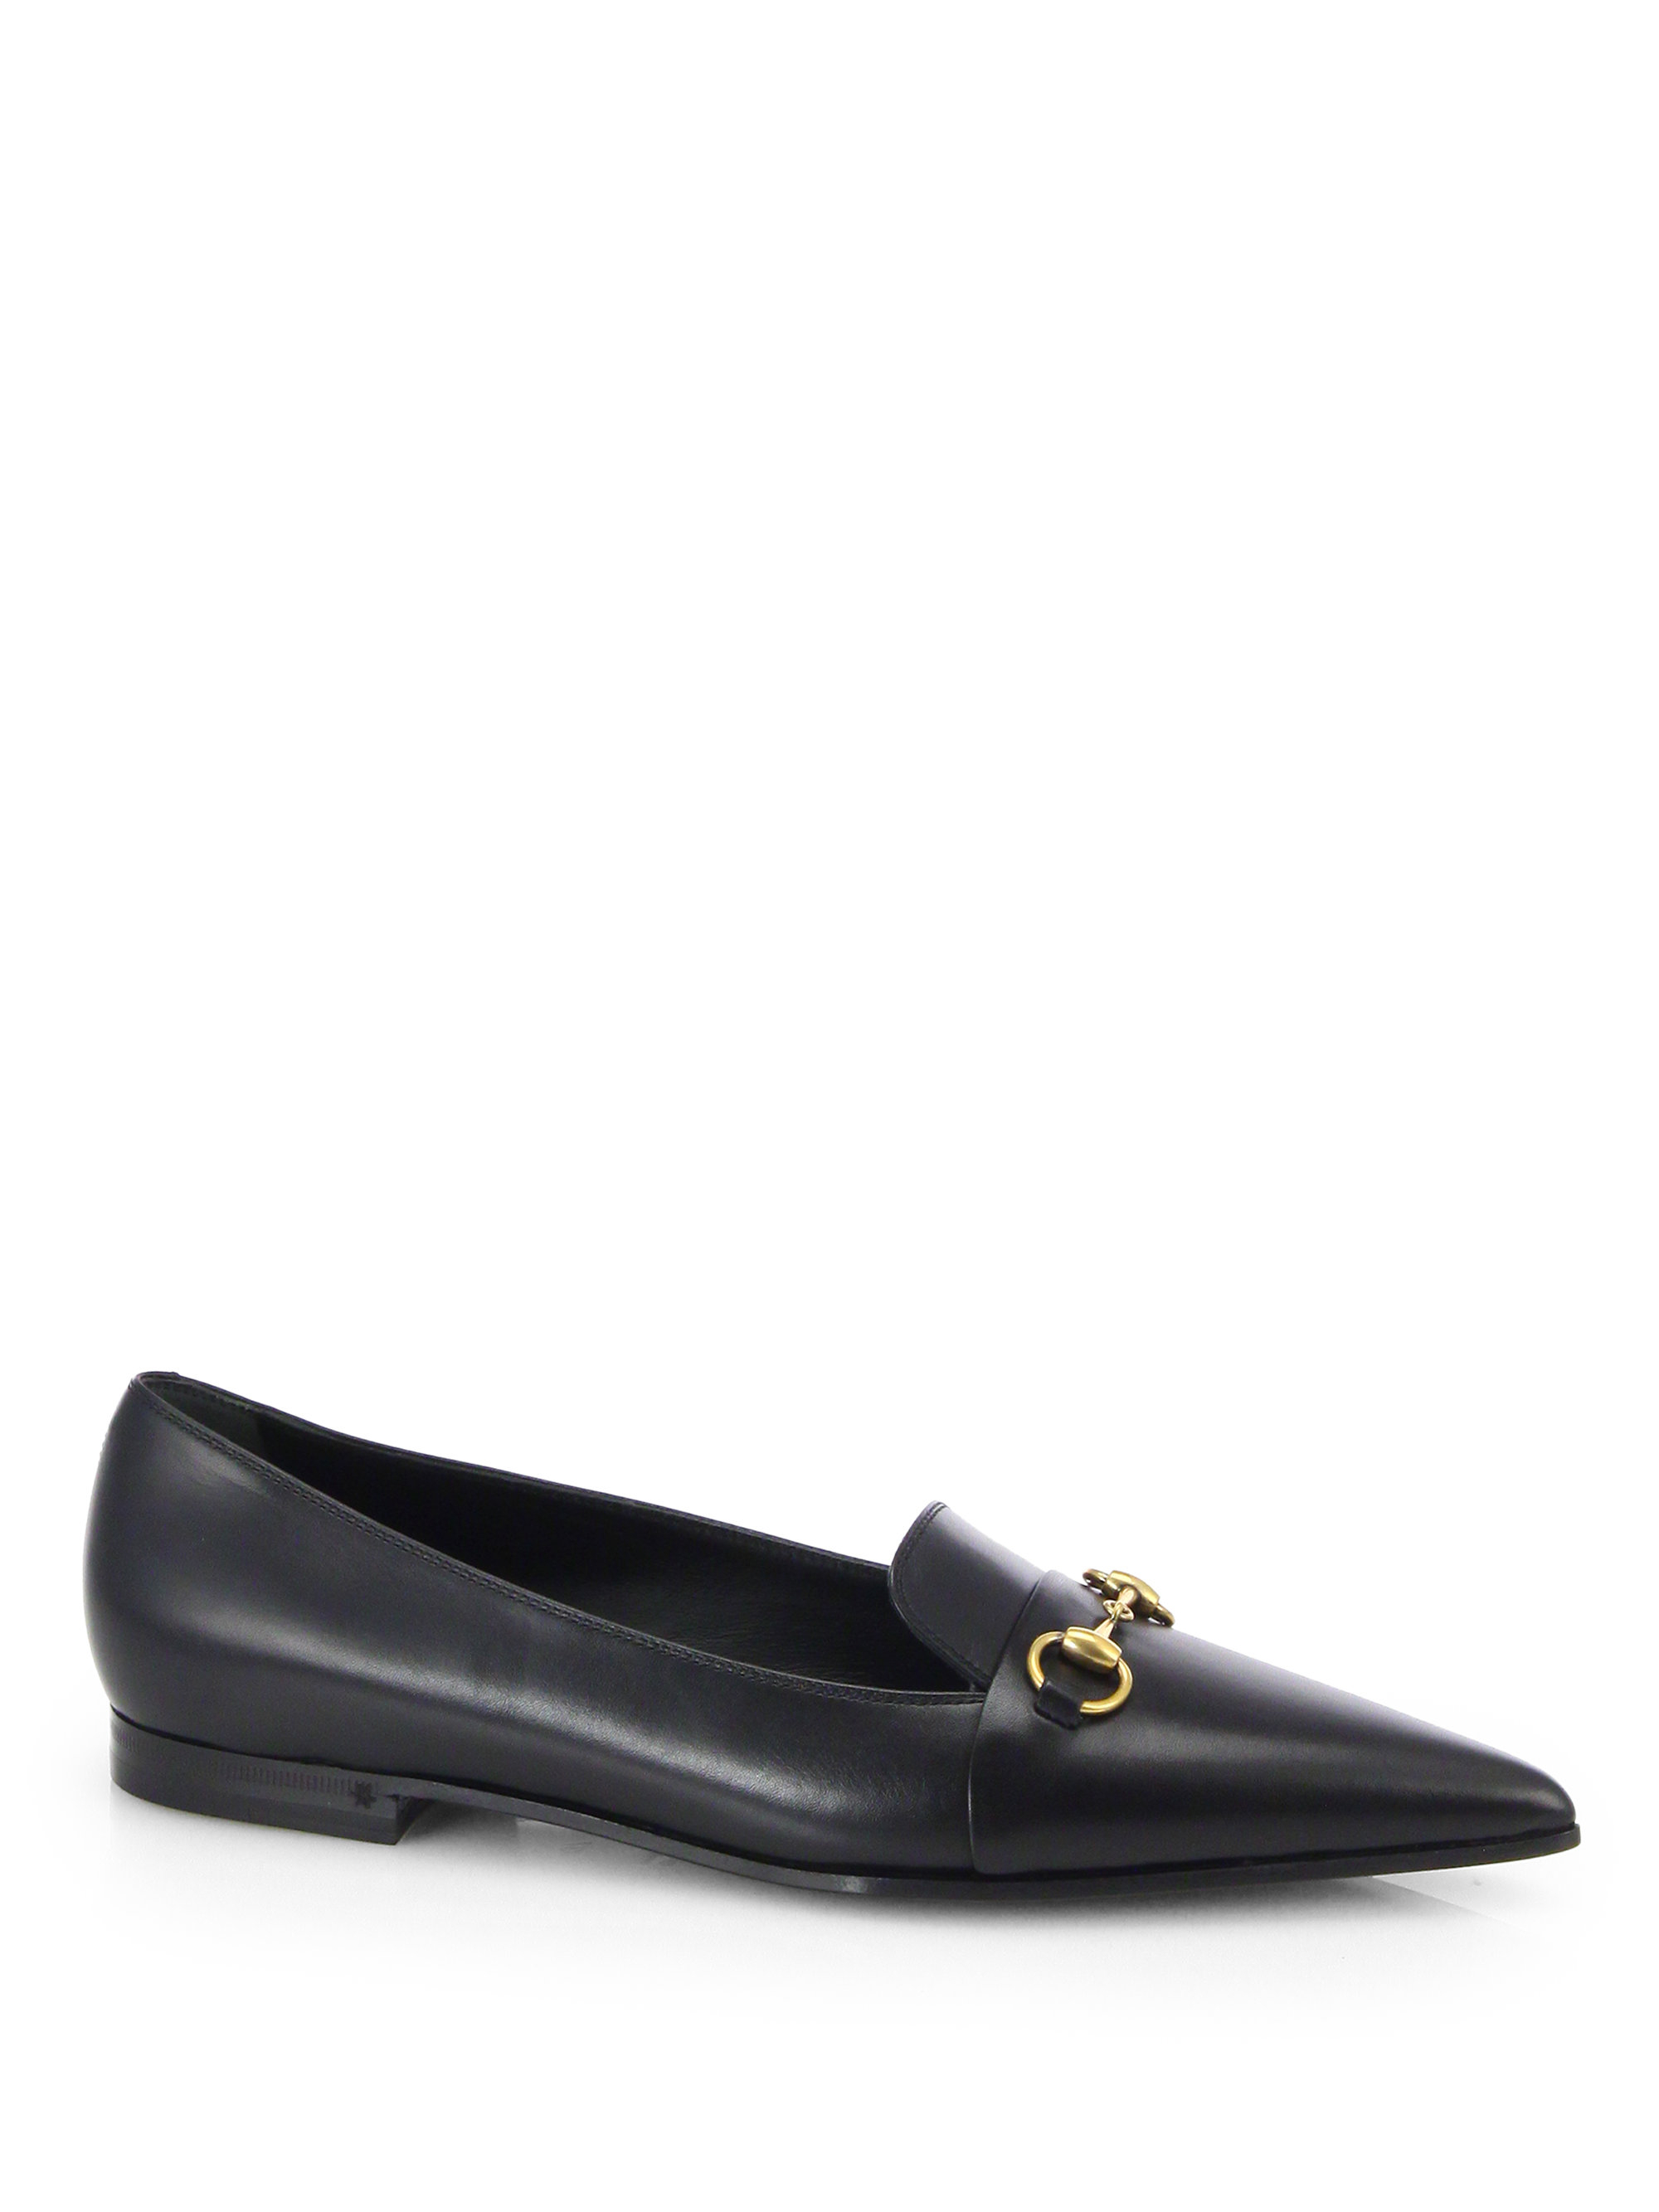 Lyst - Gucci Heidi Leather Point Toe Horsebit Loafers in Black